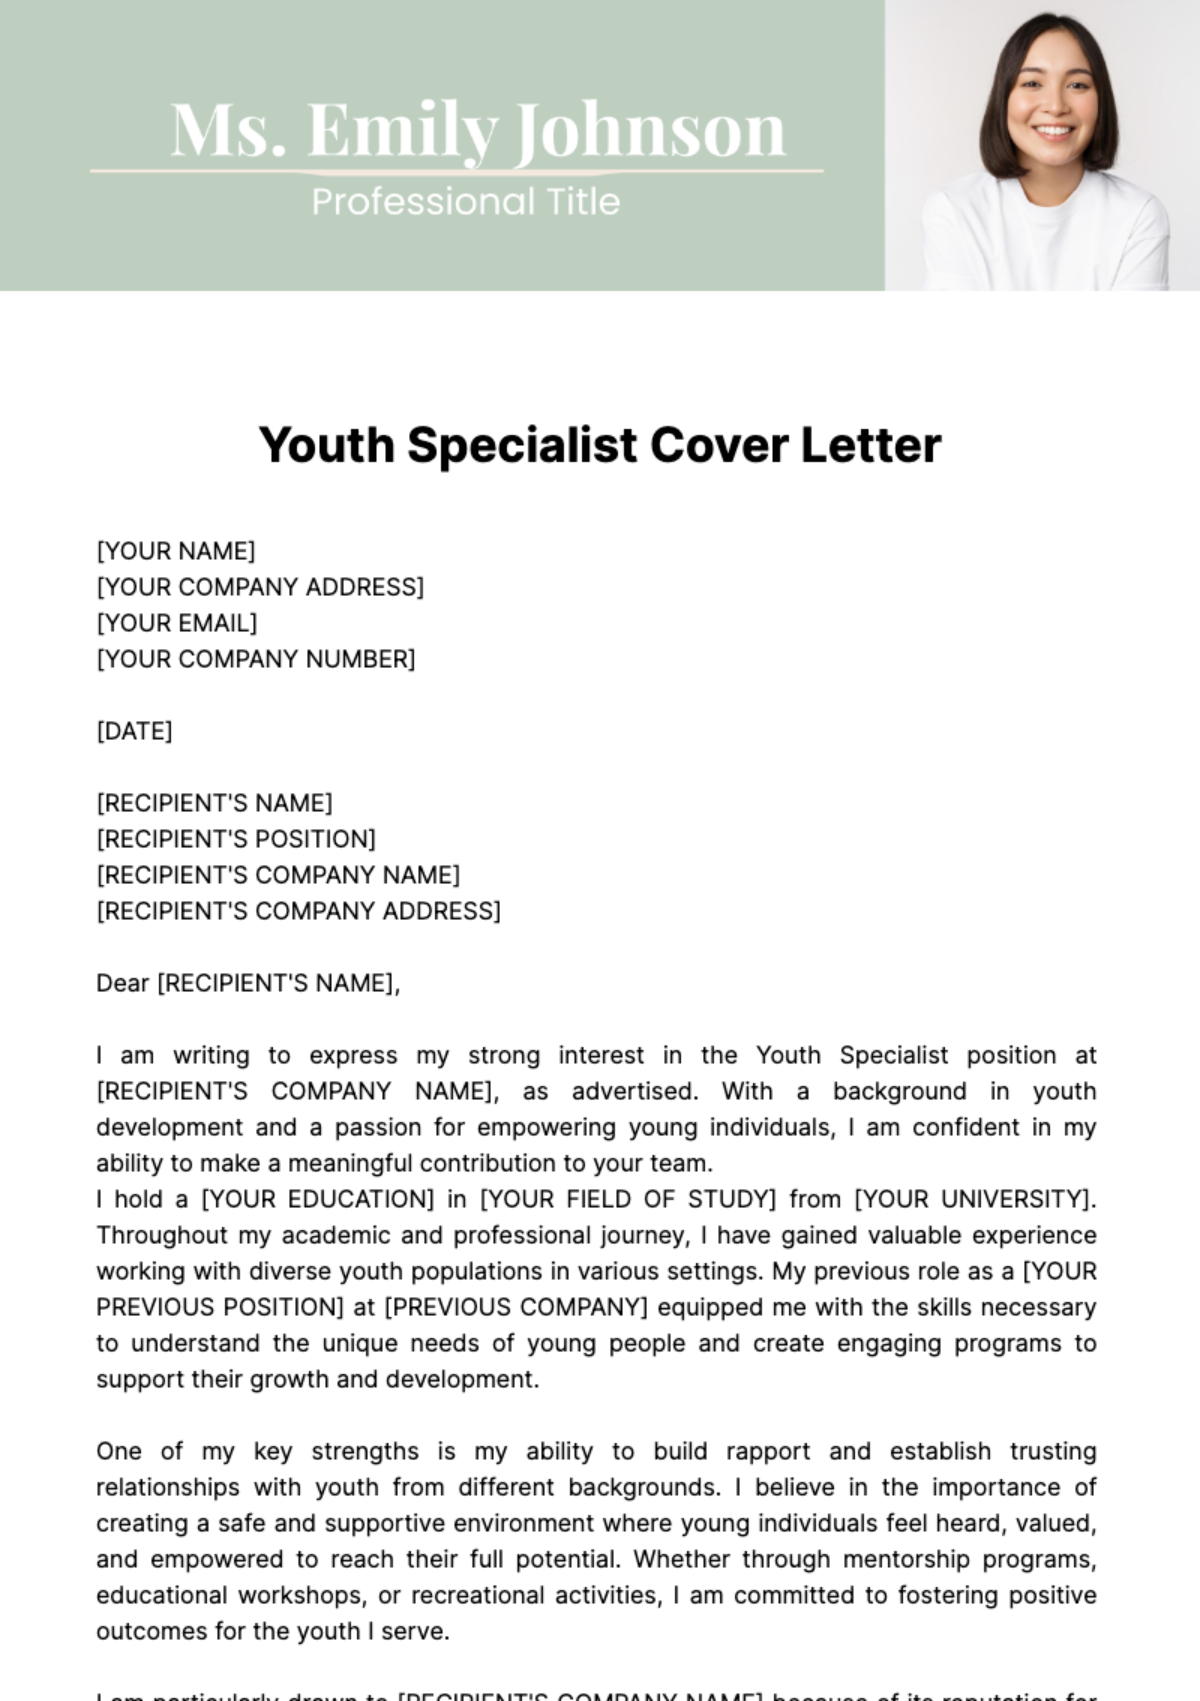 Free Youth Specialist Cover Letter Template